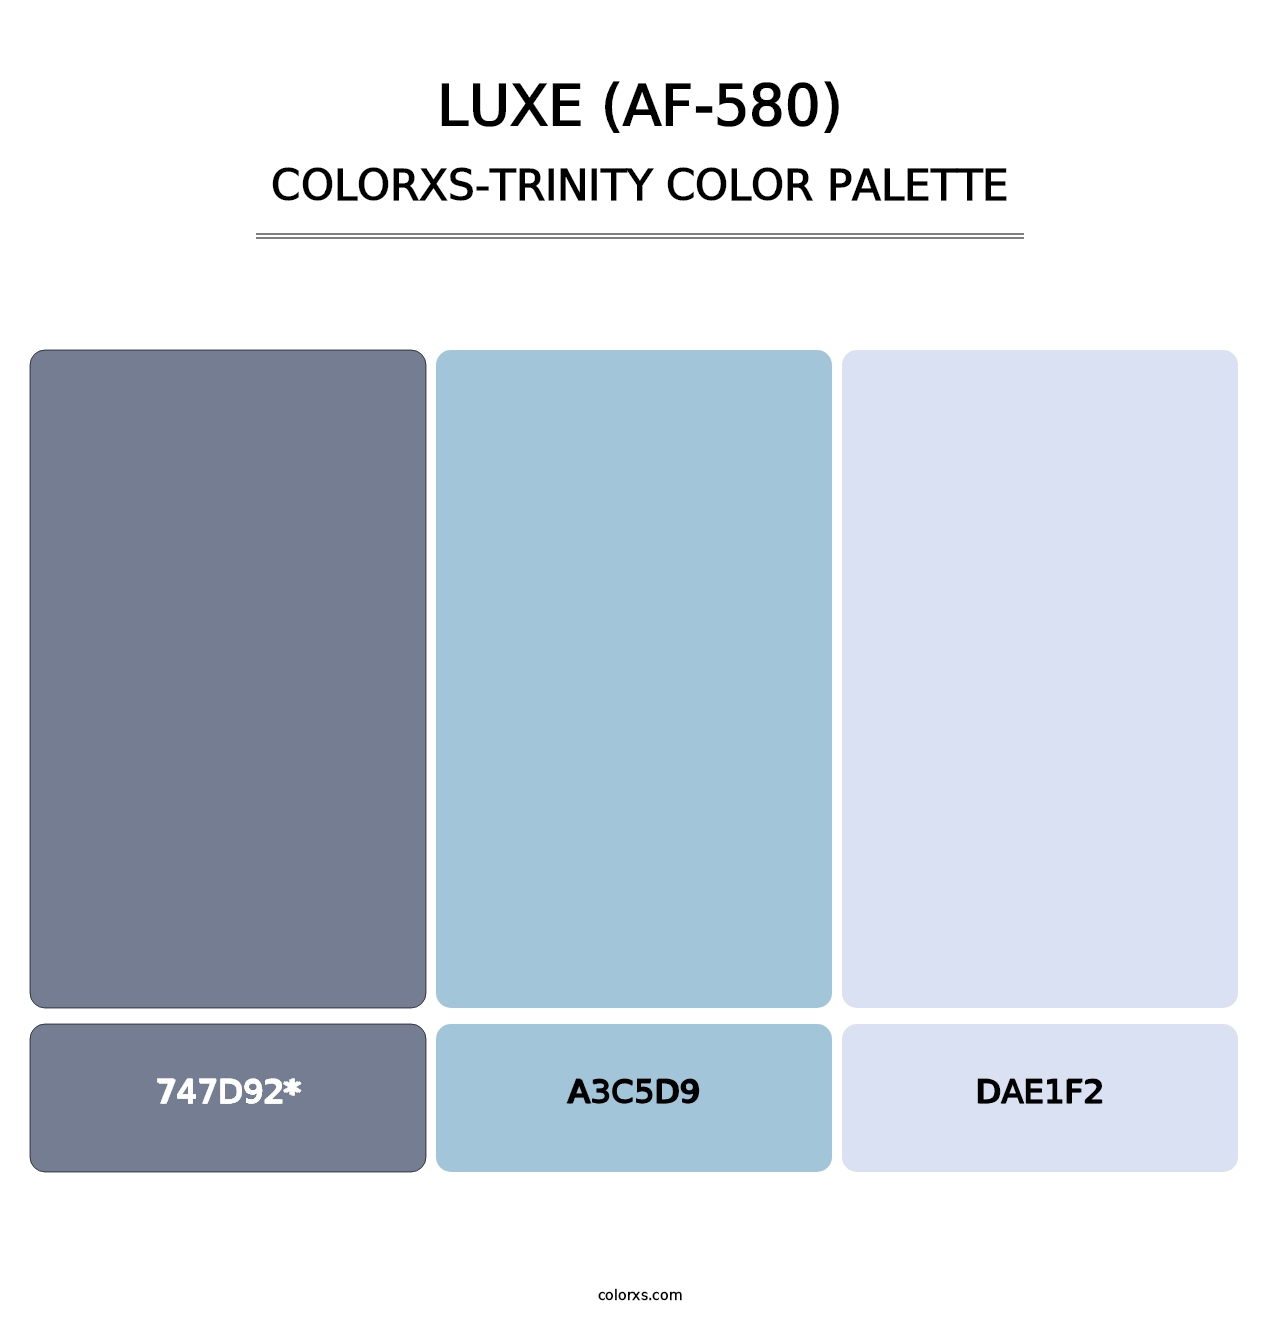 Luxe (AF-580) - Colorxs Trinity Palette